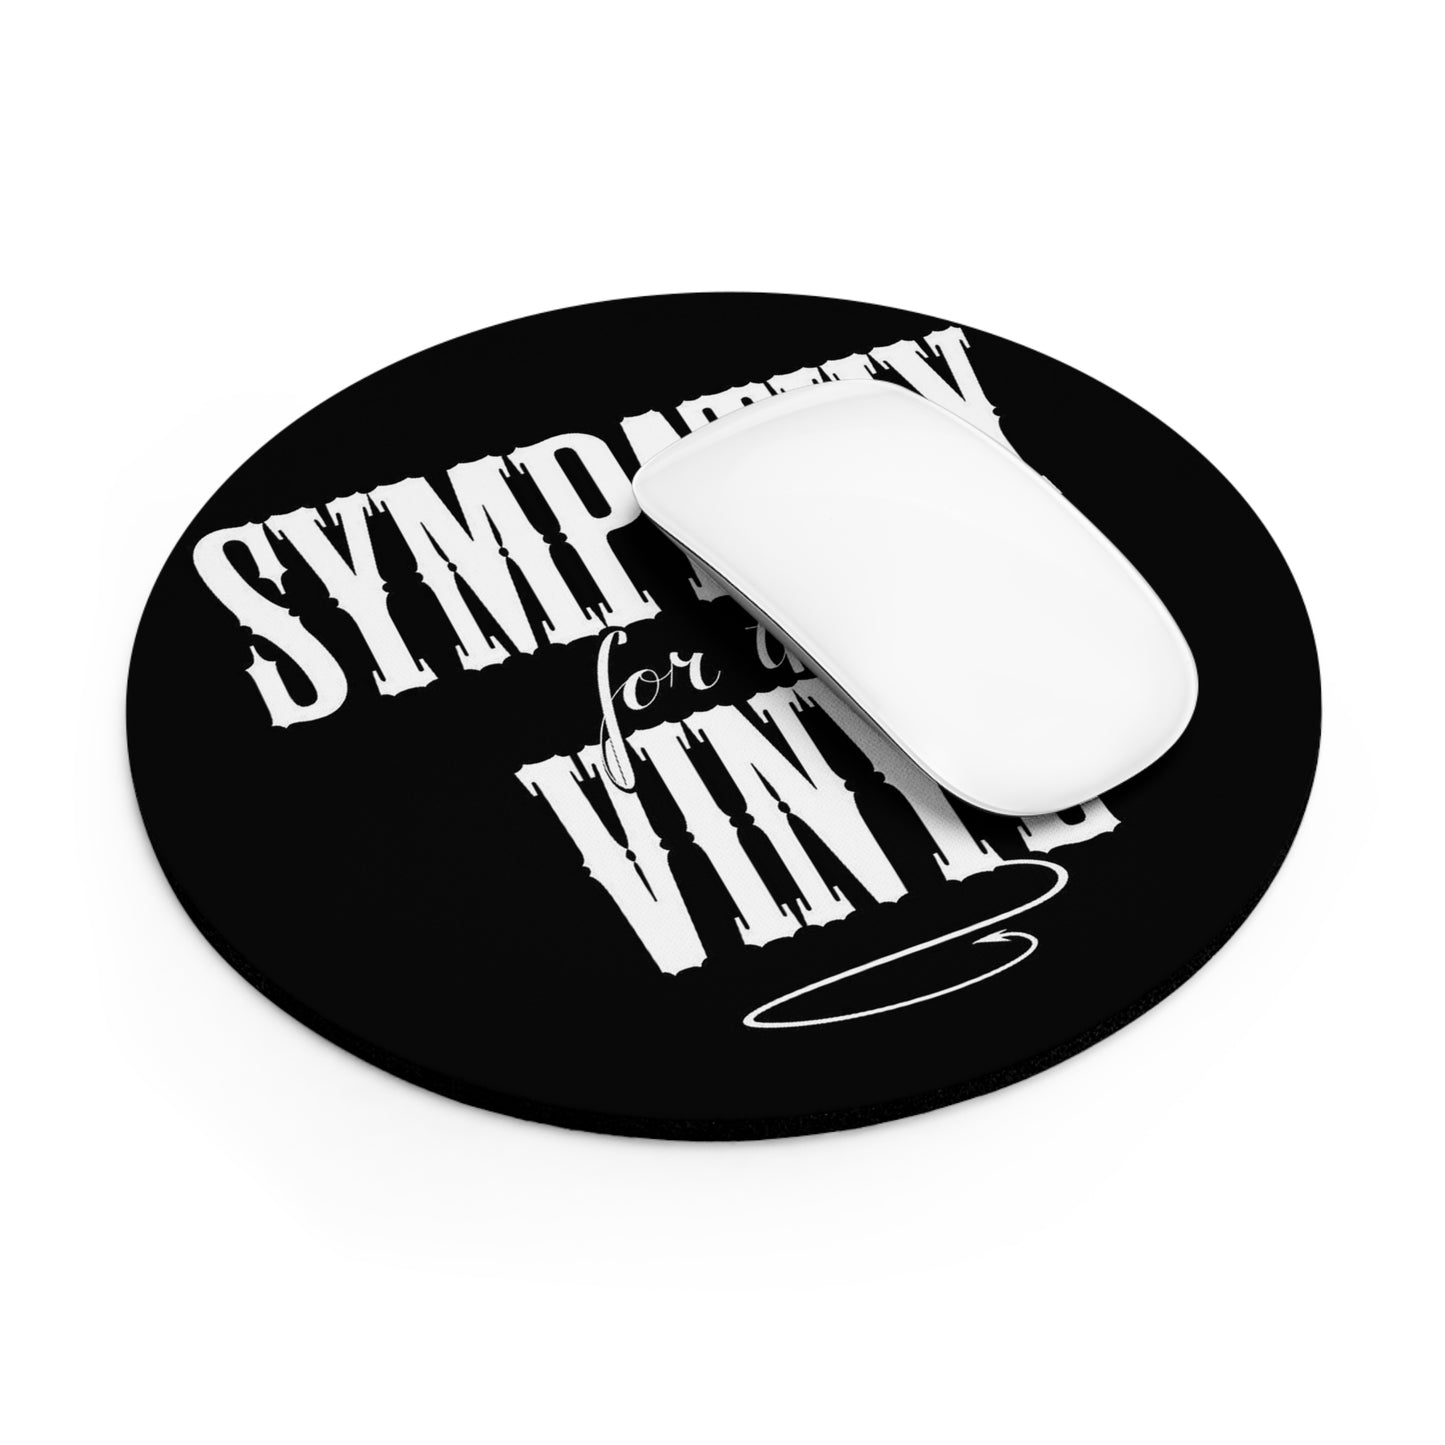 Vinyl Record Themed Mouse Pad Sympathy for the Vinyl Print with mouse